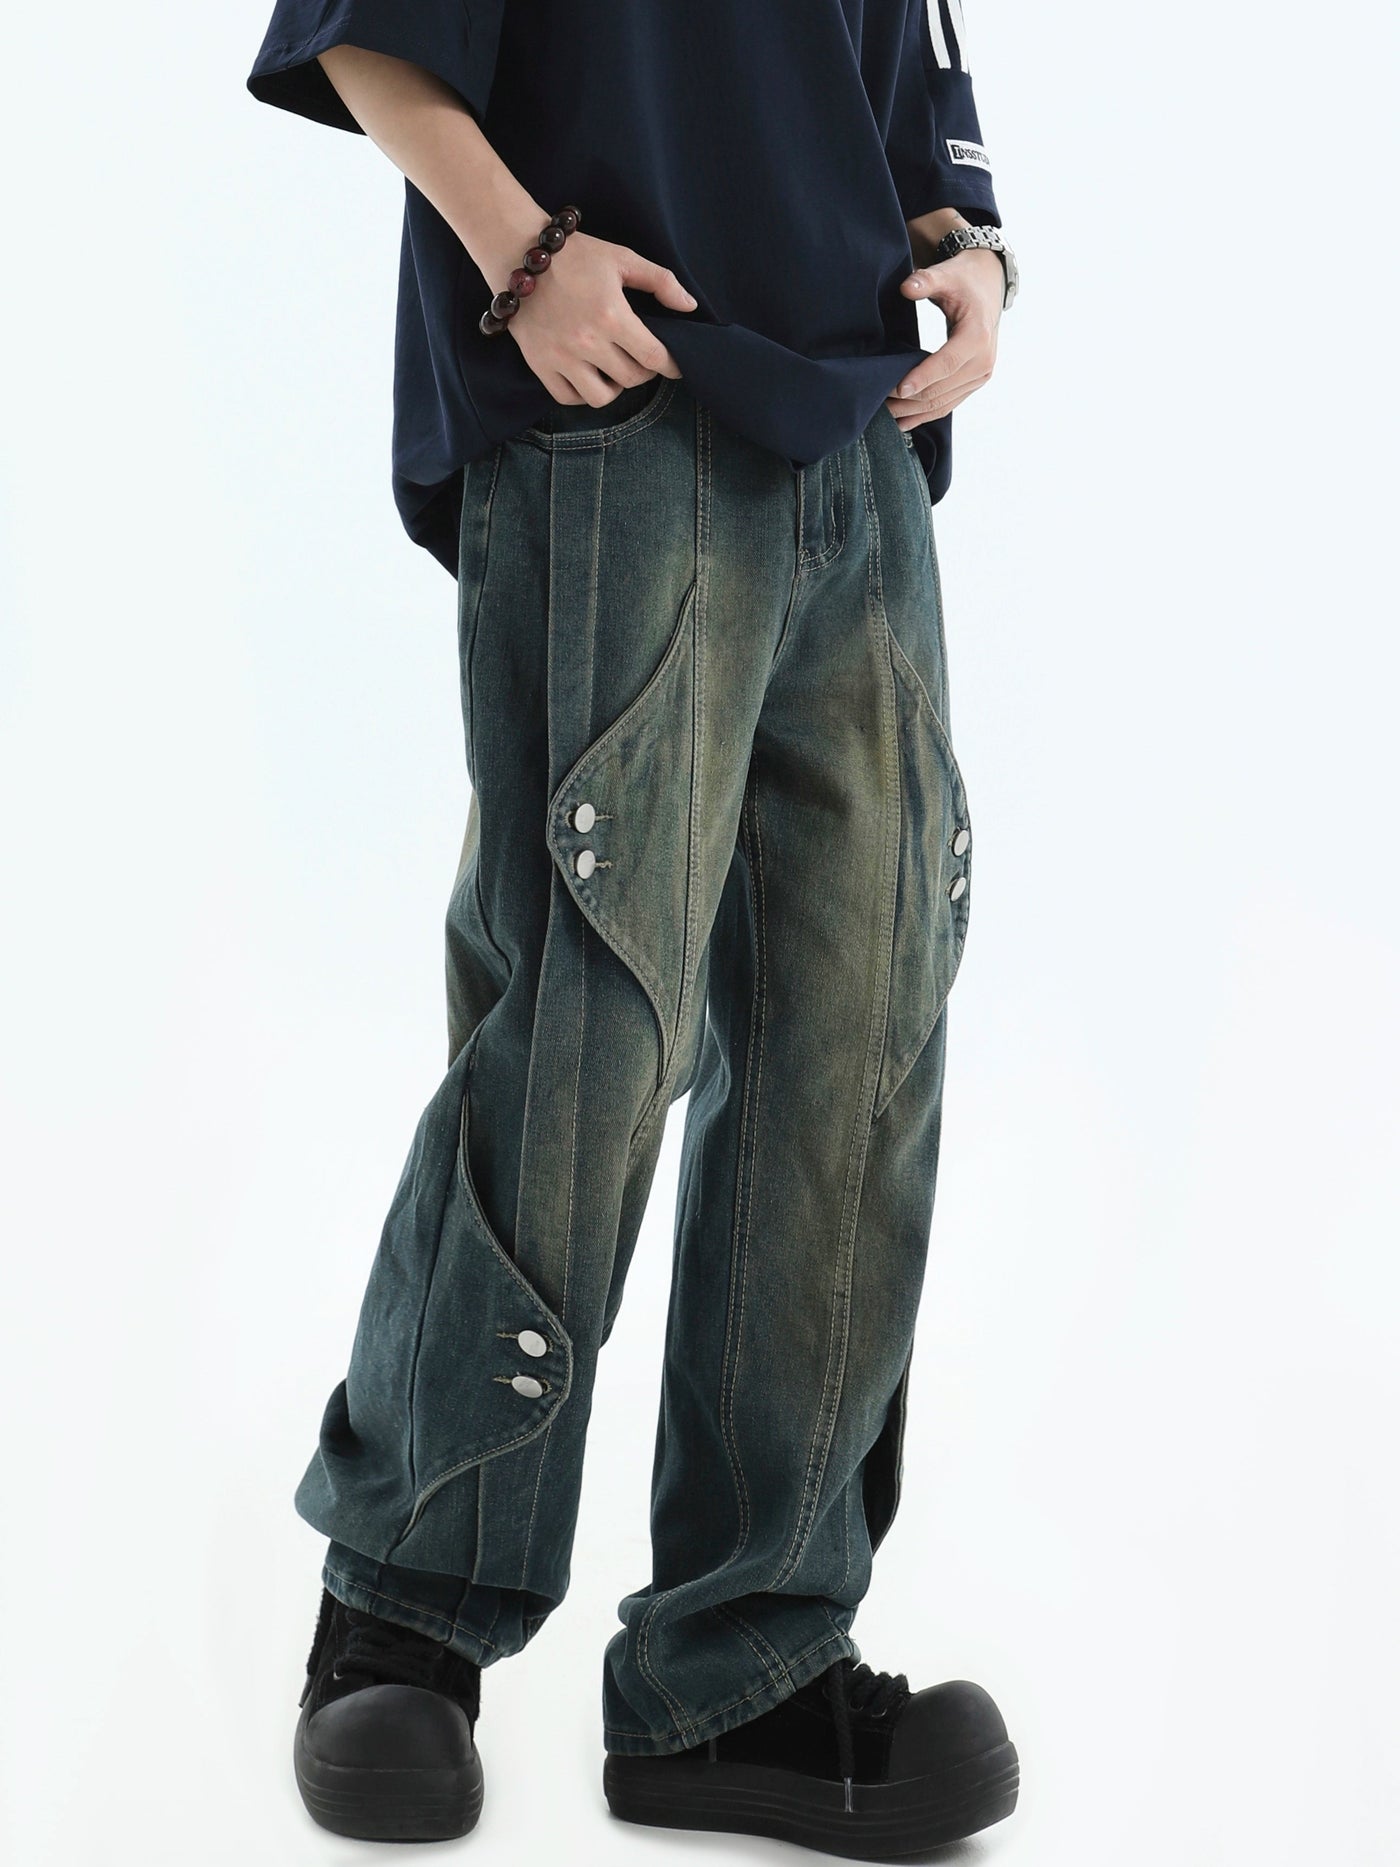 Buttoned Spots Washed Jeans Korean Street Fashion Jeans By INS Korea Shop Online at OH Vault